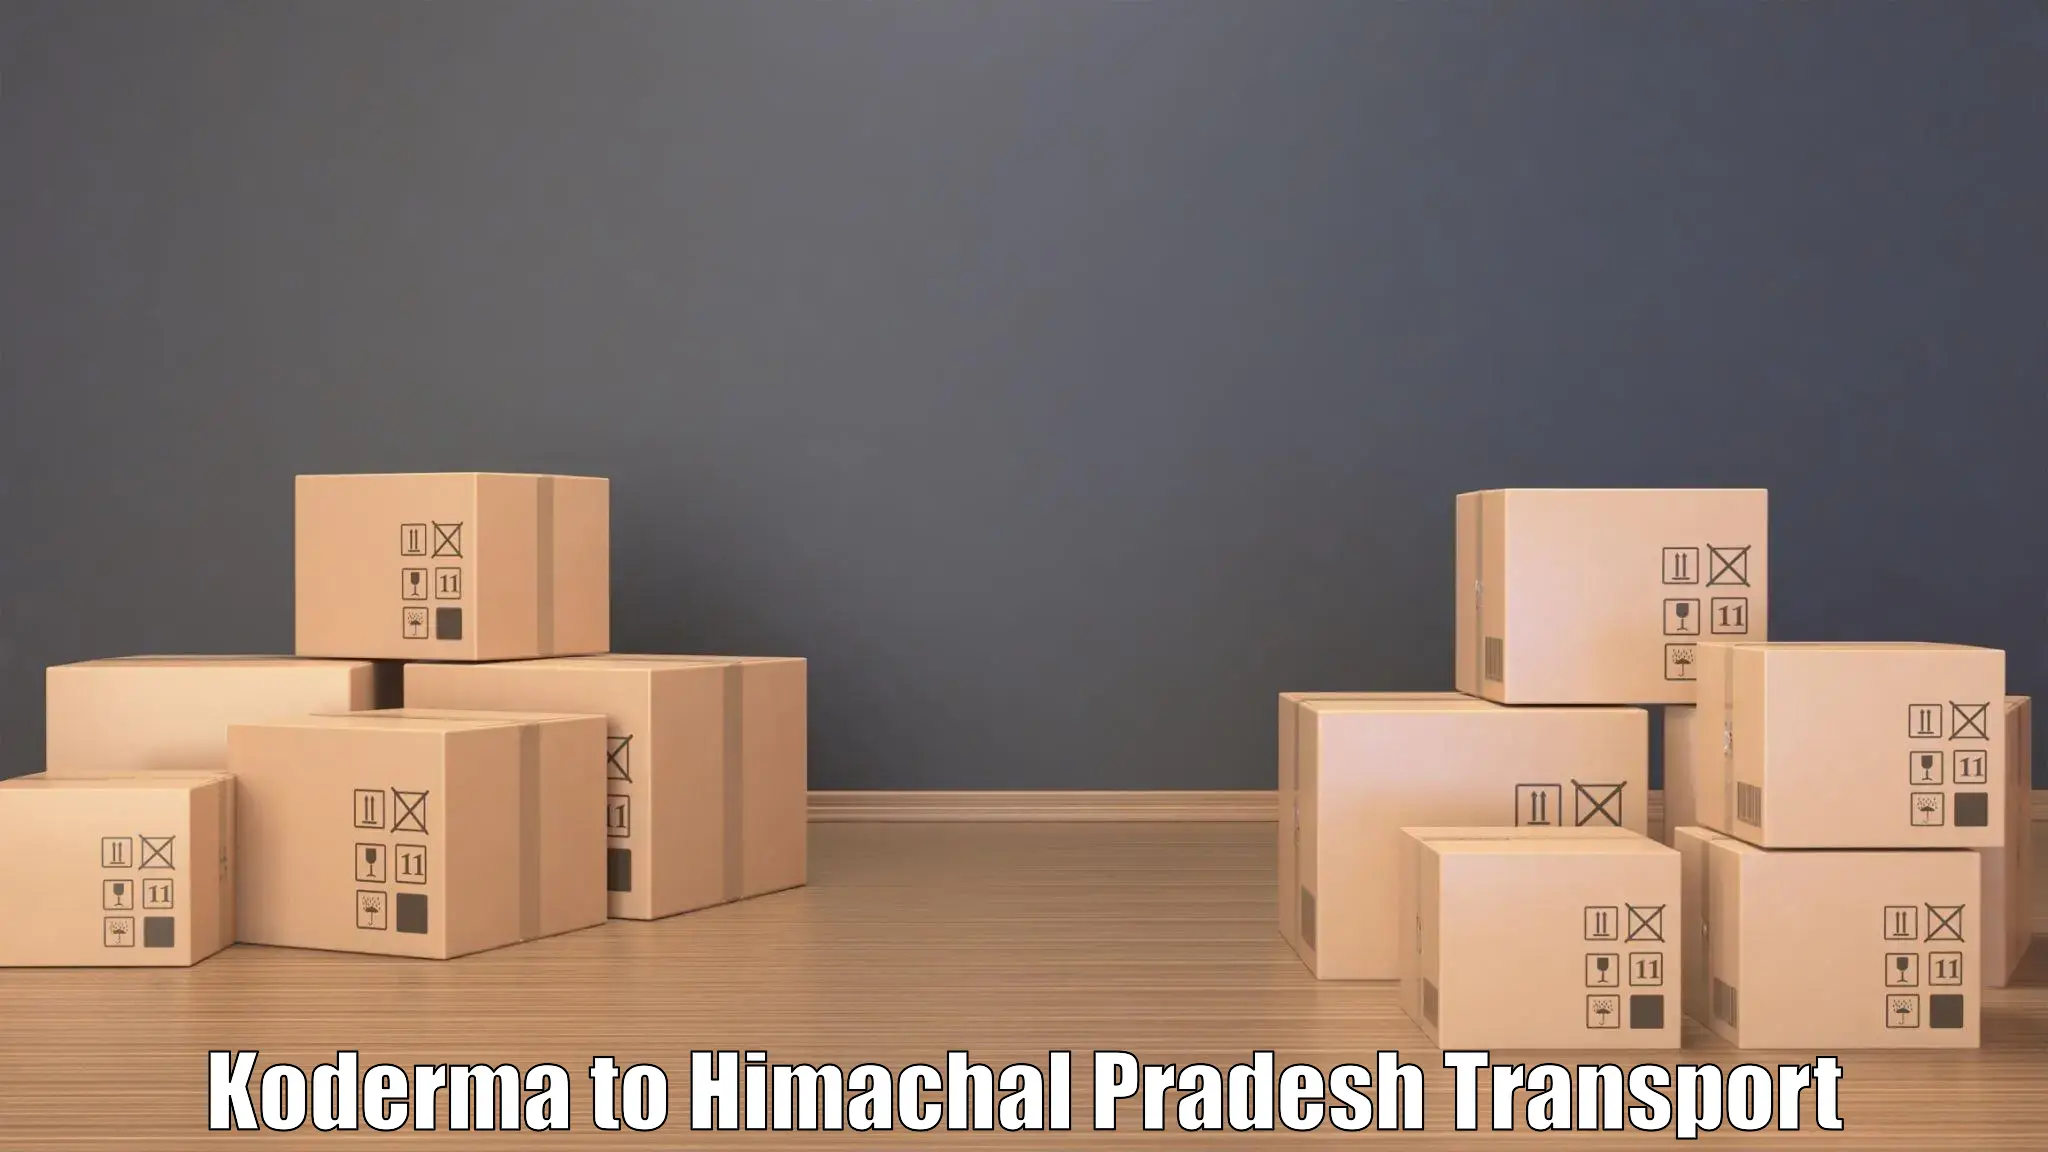 Best transport services in India in Koderma to Kotkhai